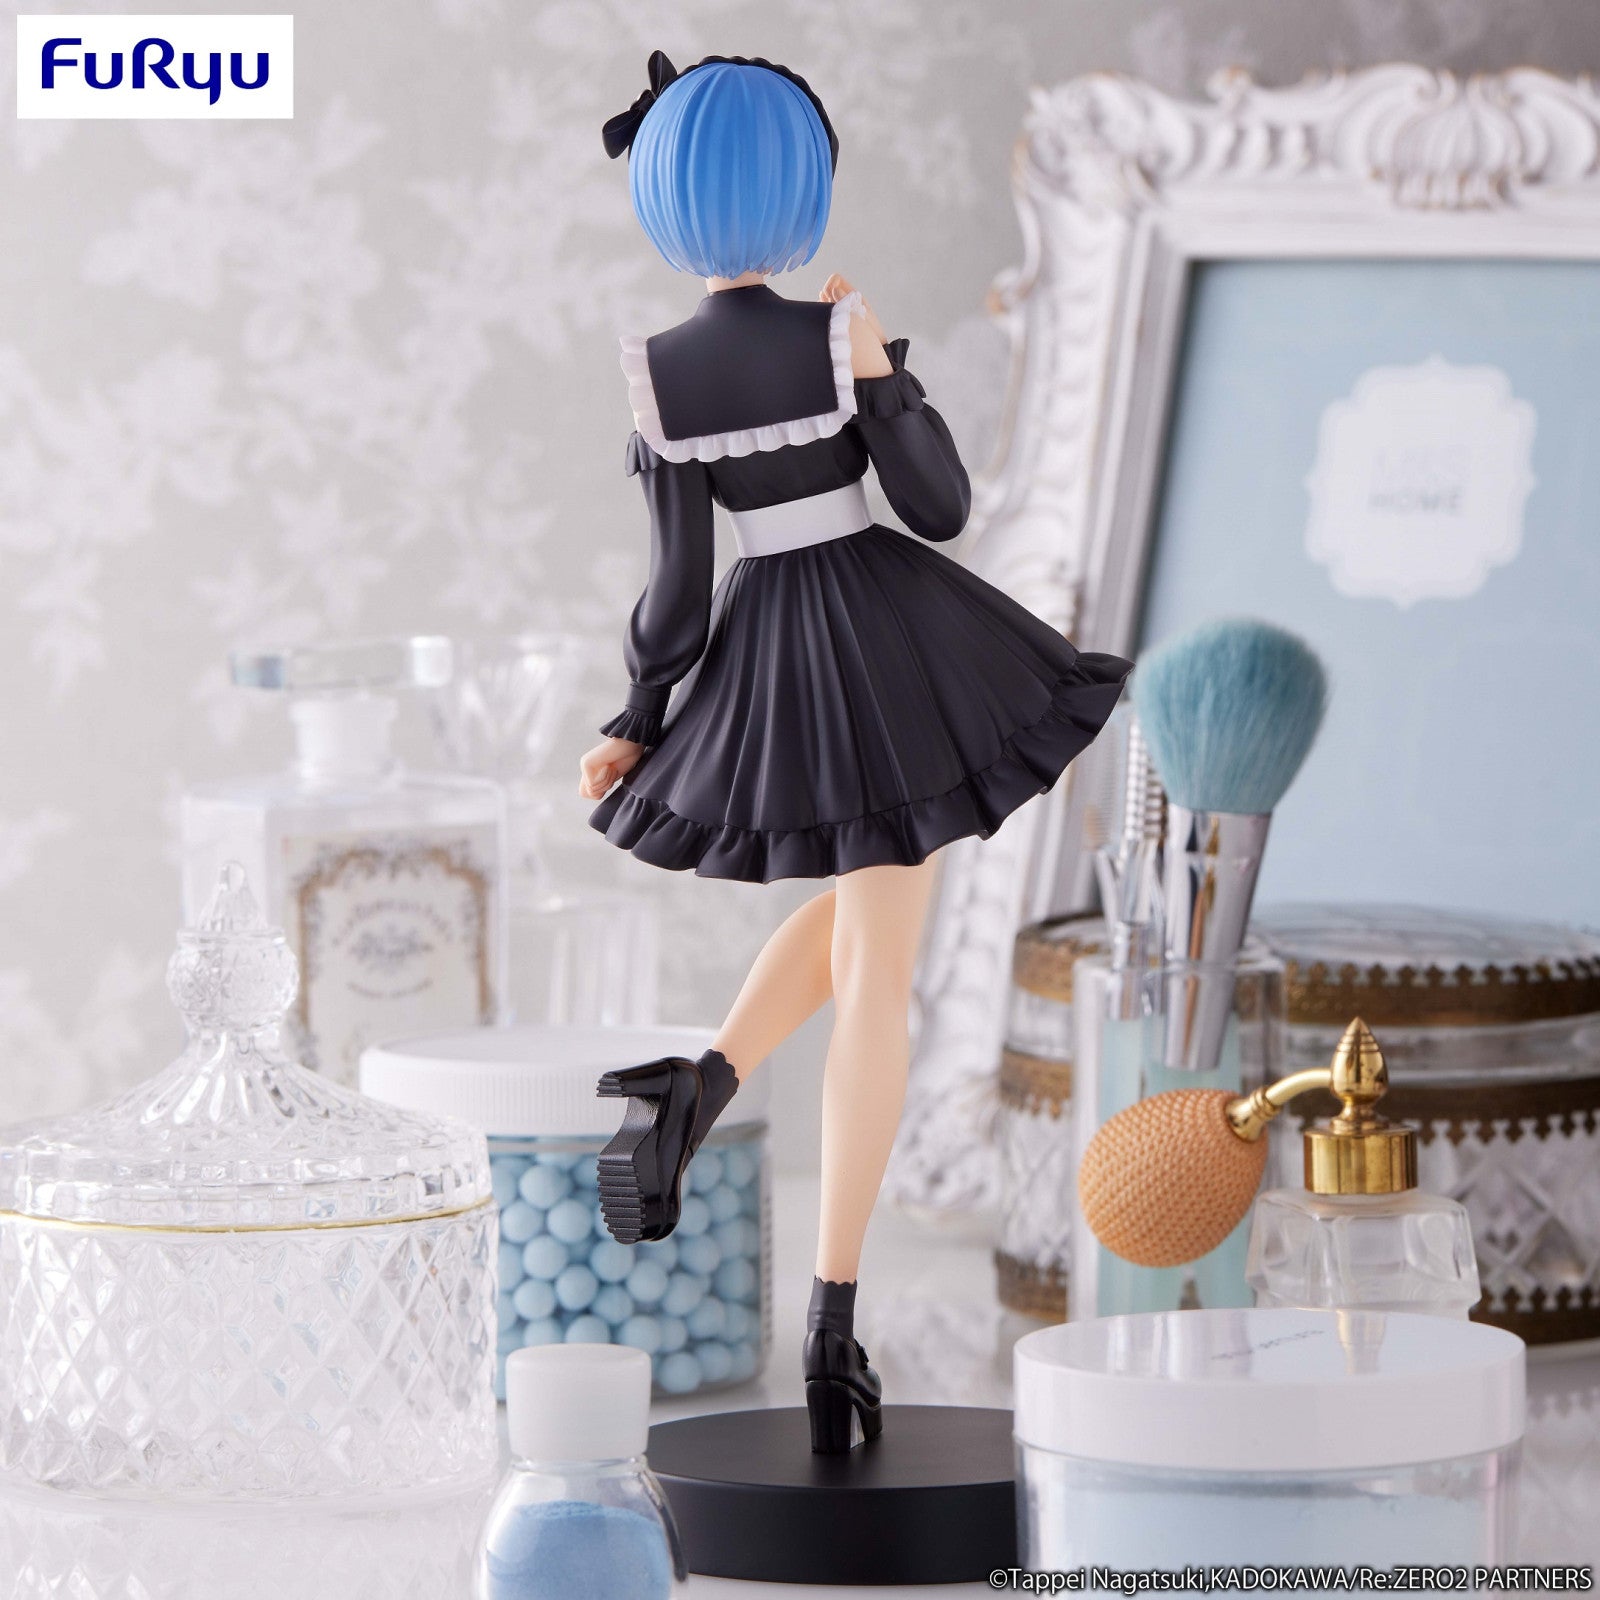 Re:ZERO Starting Life in Another World: TRIO TRY IT FIGURE - Rem Girly Outfit